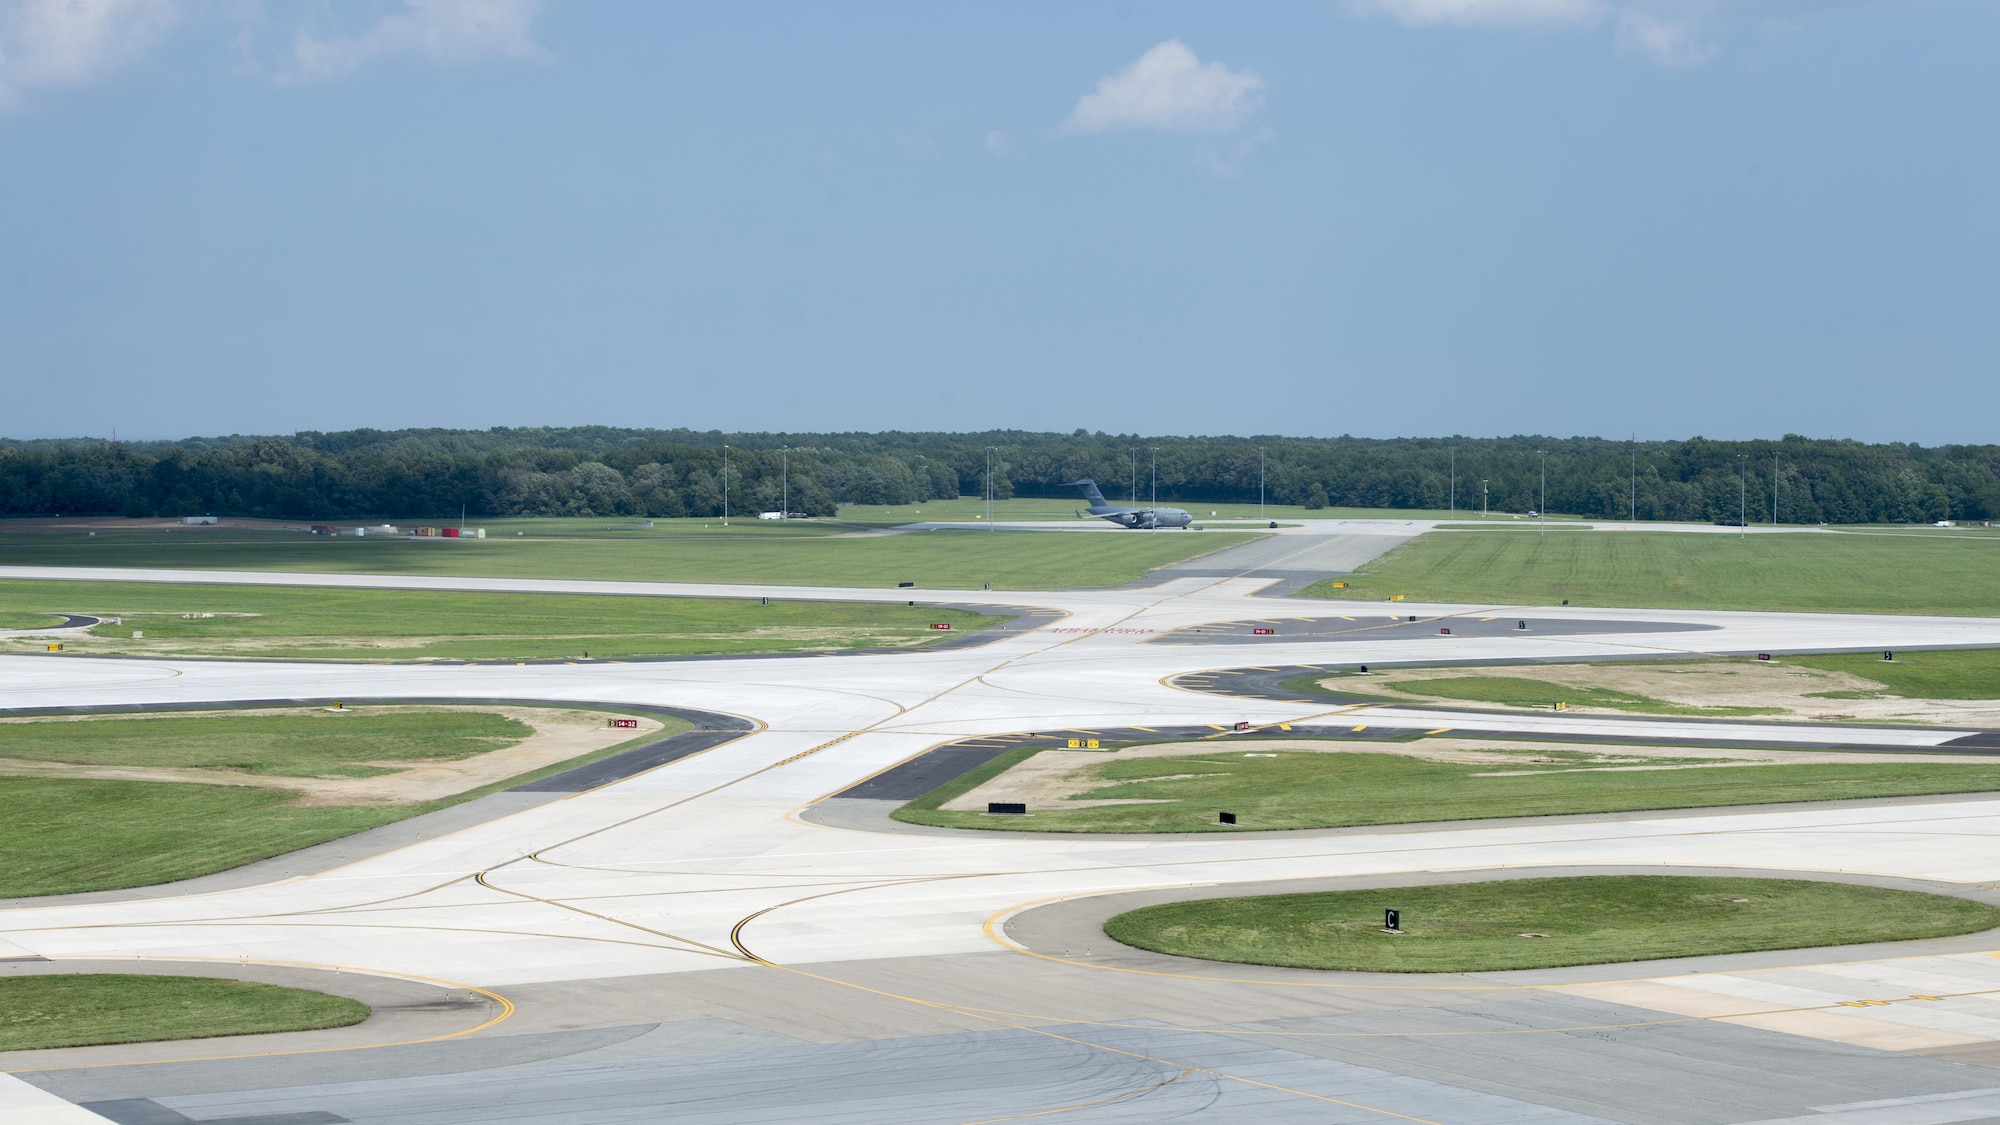 Runway 14-32 on Dover Air Force Base, Del., reopened Aug. 16, 2017, after several months of construction. Reopening this runway marks the completion of the latest phase of the $102 million runway reconstruction project intended to extend the lifespan of the runway by 50 to 75 years. (U.S. Air Force photo by Senior Airman Zachary Cacicia)